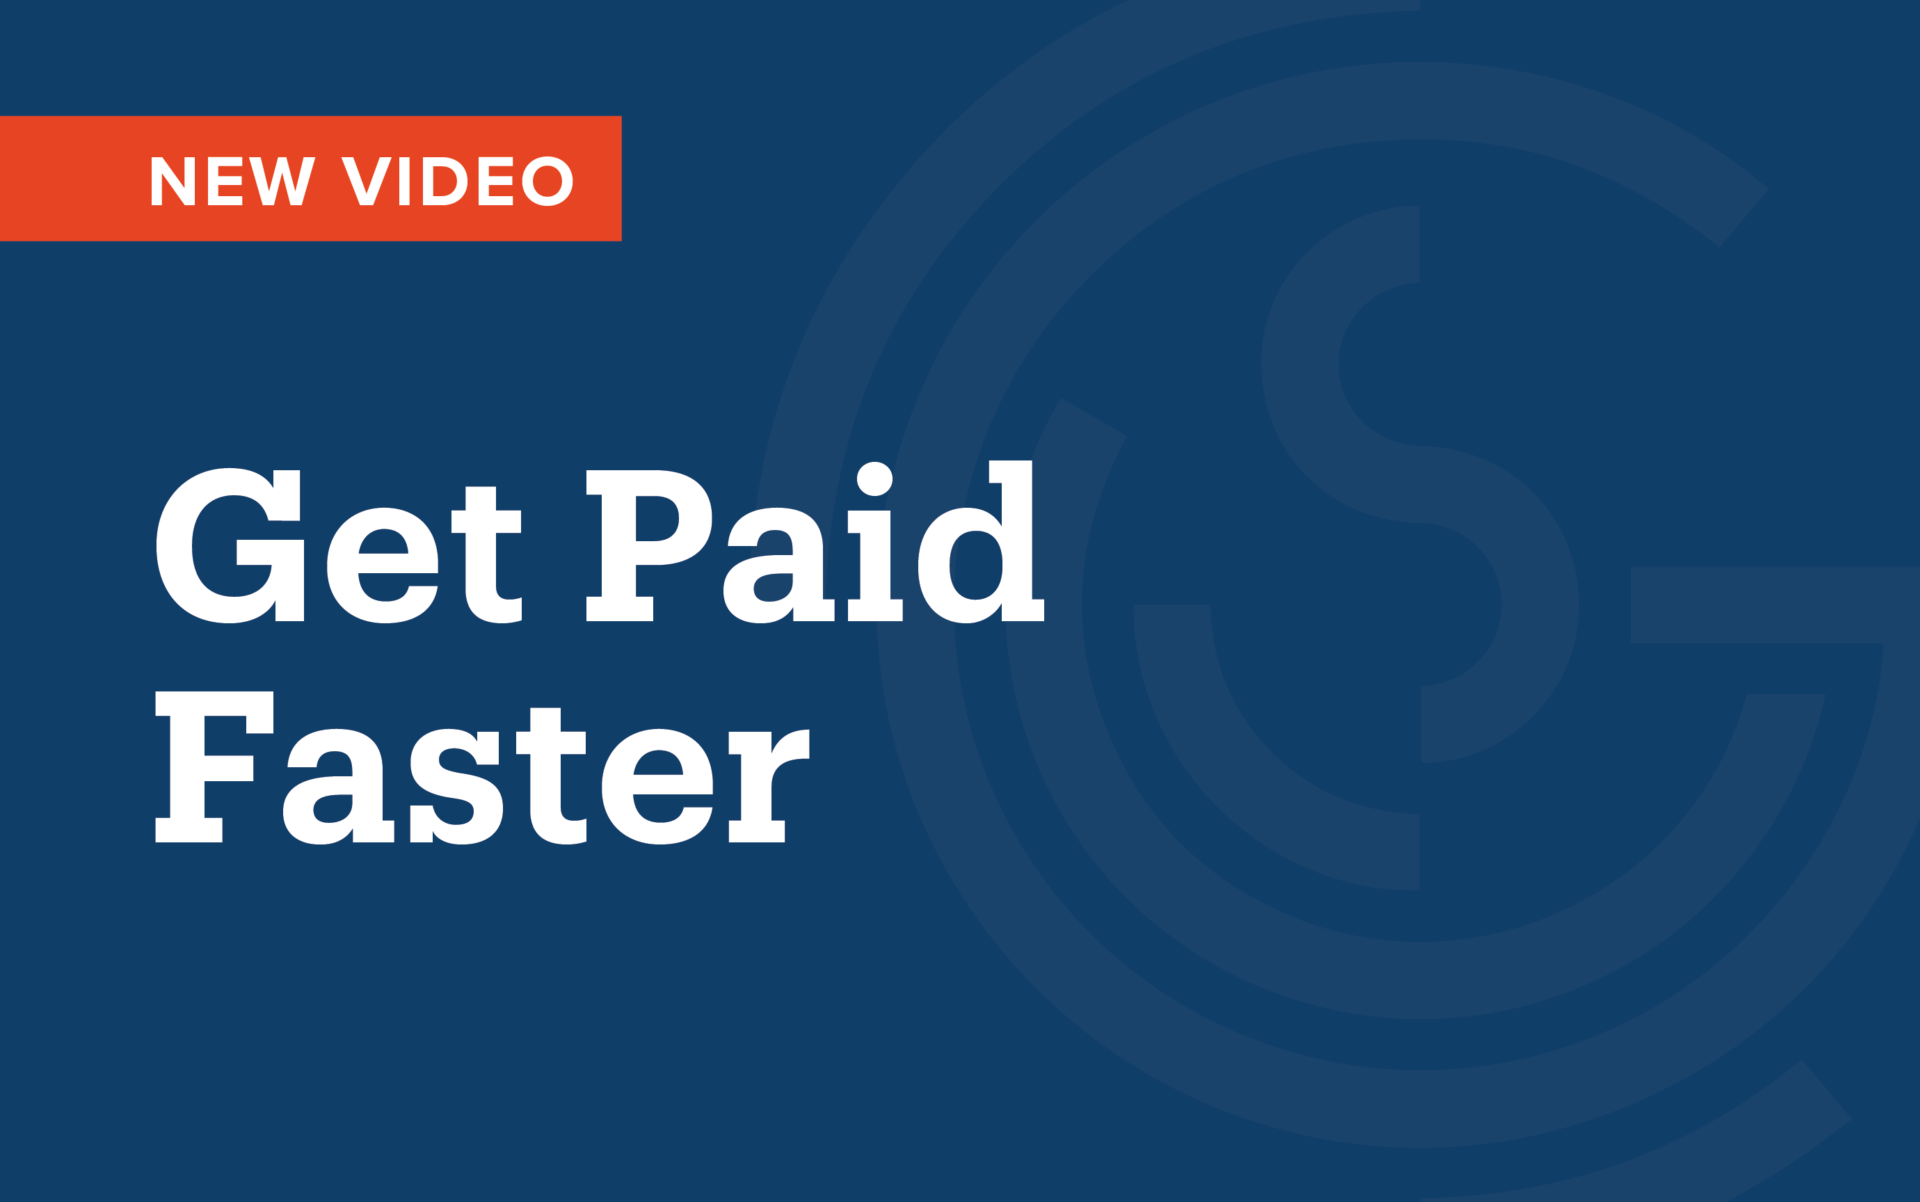 Get paid faster with Get Gigs!